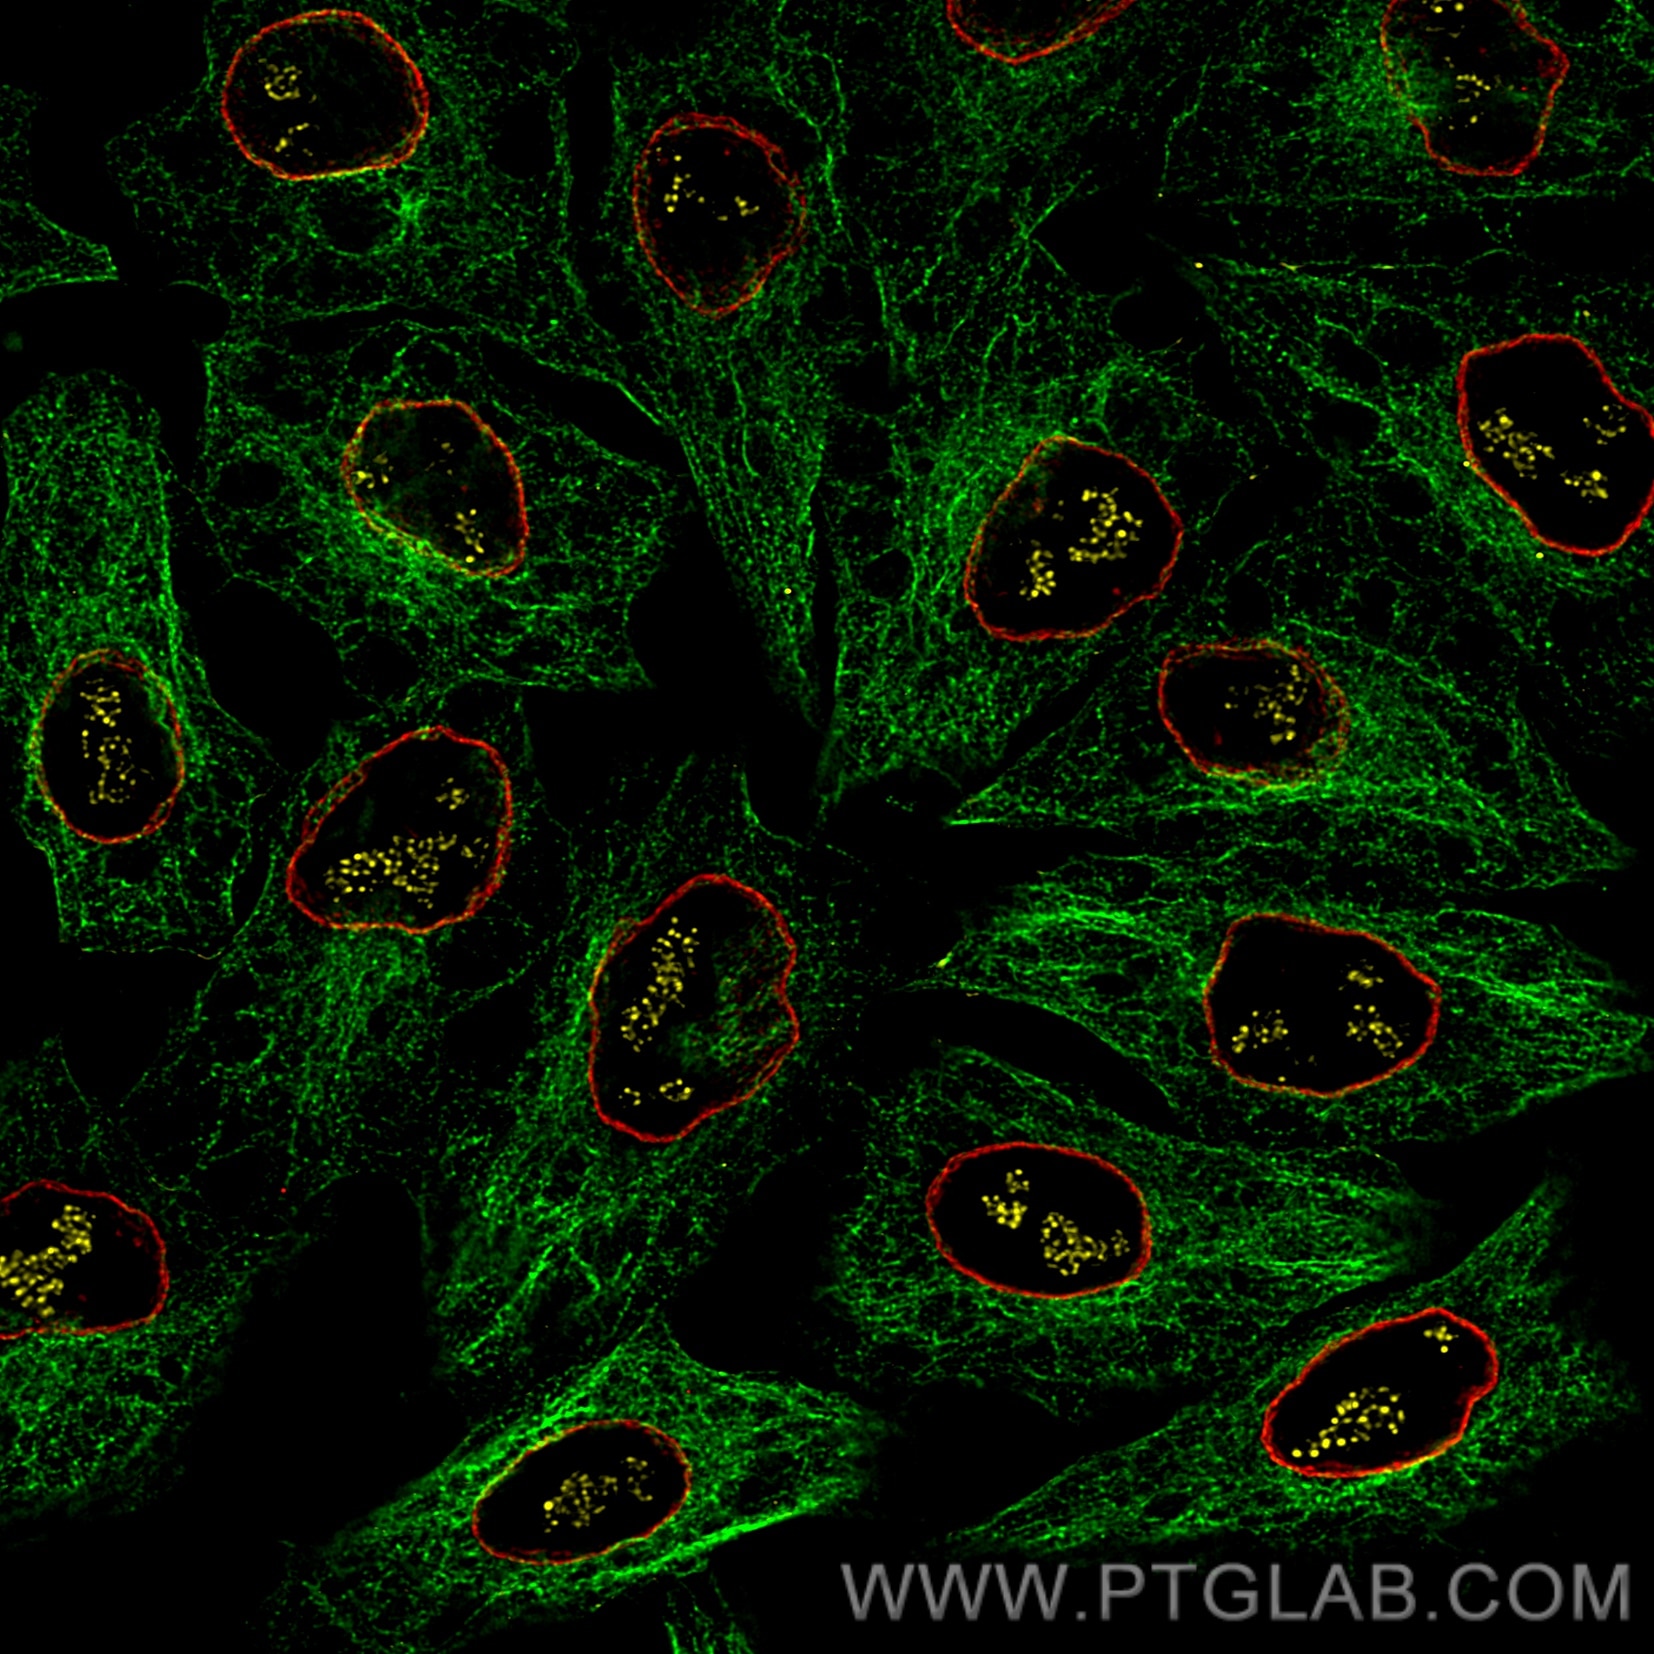 Immunofluorescence of HeLa: PFA-fixed HeLa cells were stained with anti-Tubulin antibody labeled with FlexAble CoraLite® Plus 488 Kit (KFA061, green), anti-Lamin antibody labeled with FlexAble CoraLite® Plus 555 Kit (KFA062, red) and anti-PAF49 antibody labeled with FlexAble CoraLite® Plus 647 Kit (KFA063, yellow). Confocal images were acquired with a 100x oil objective and post-processed. Images were recorded at the Core Facility Bioimaging at the Biomedical Center, LMU Munich.